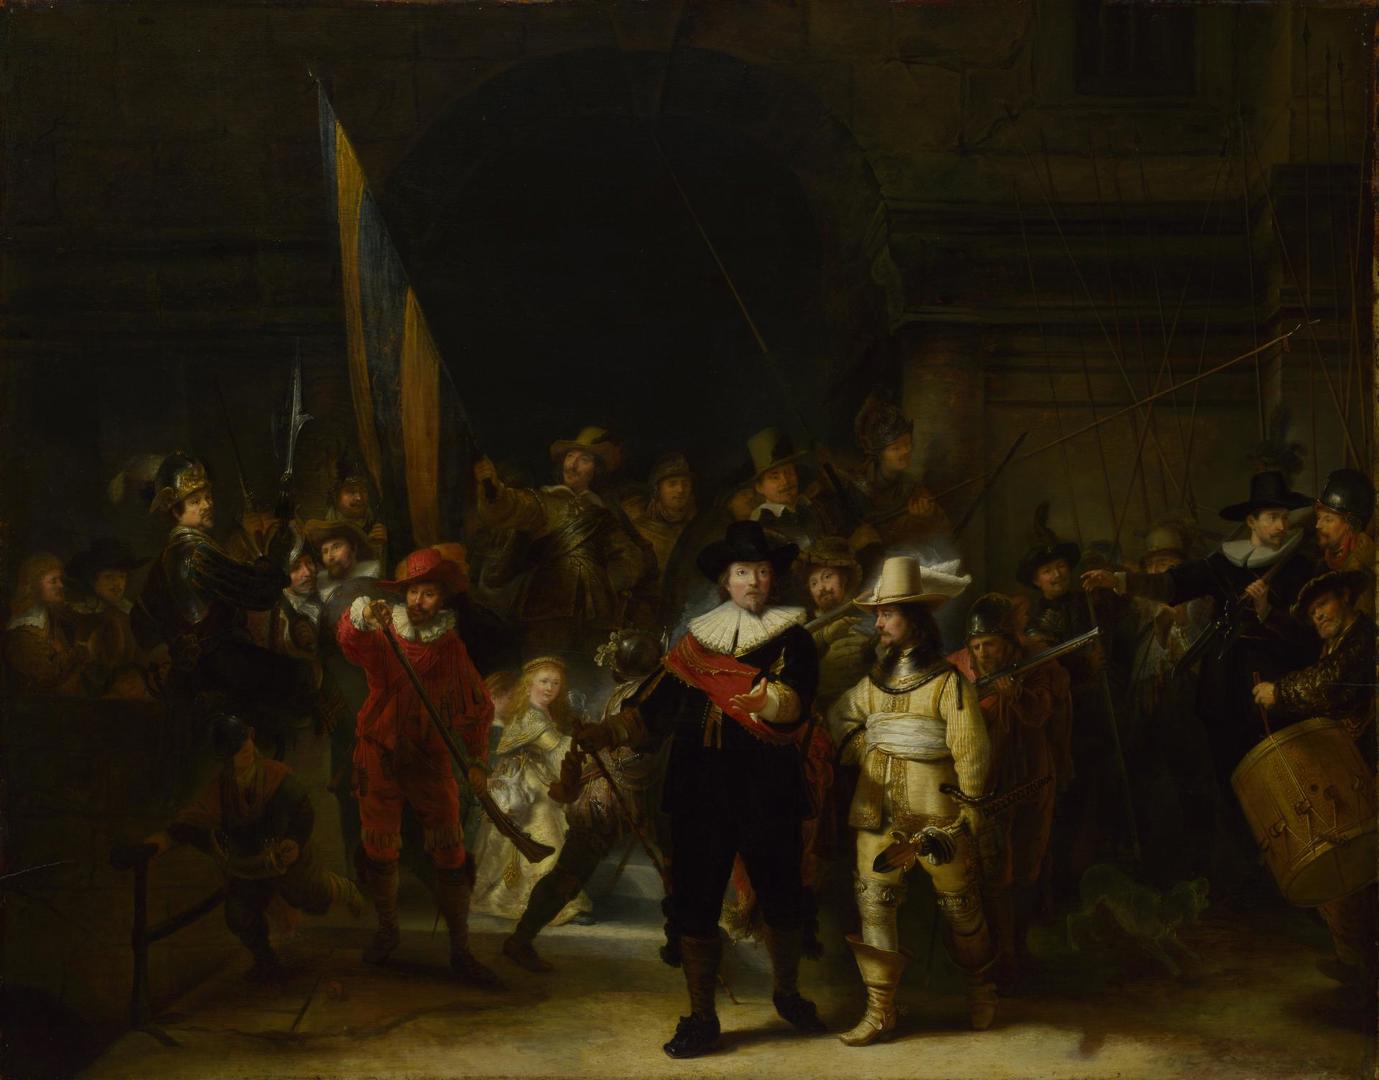 The Company of Captain Banning Cocq ('The Nightwatch') by Gerrit Lundens, after Rembrandt